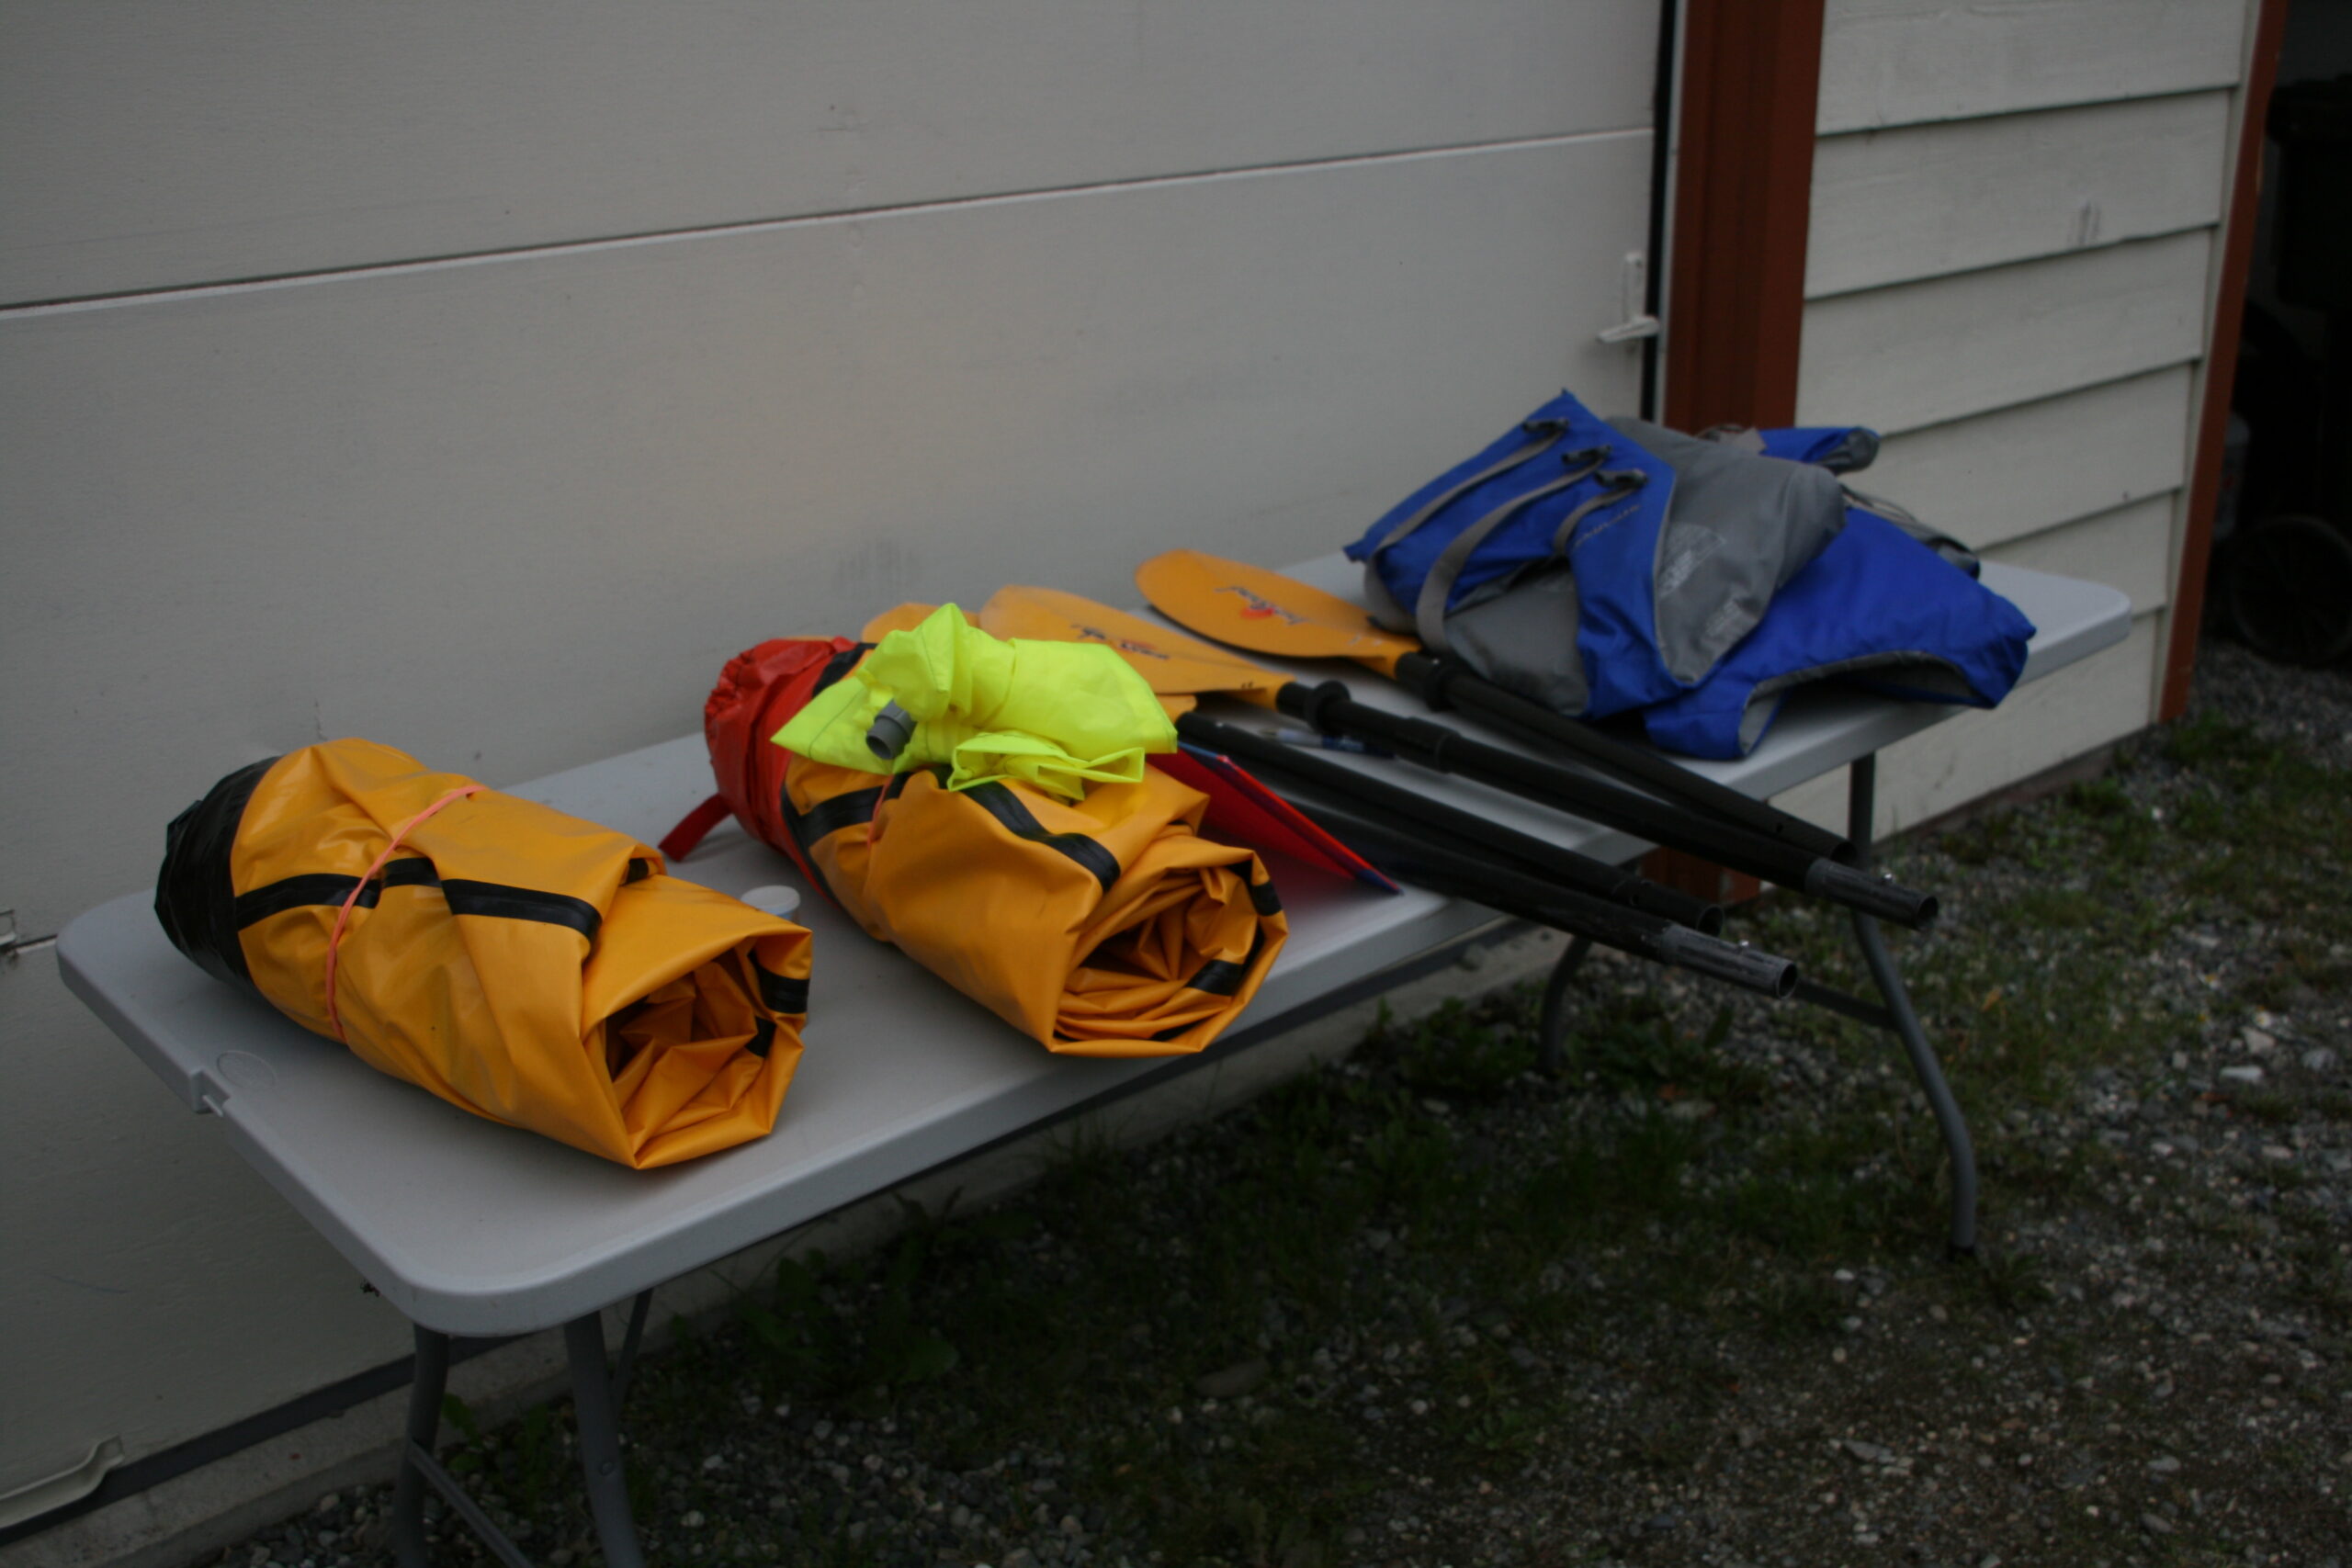 Packrafts, paddles, and life vests sit on a table ready to be packed.